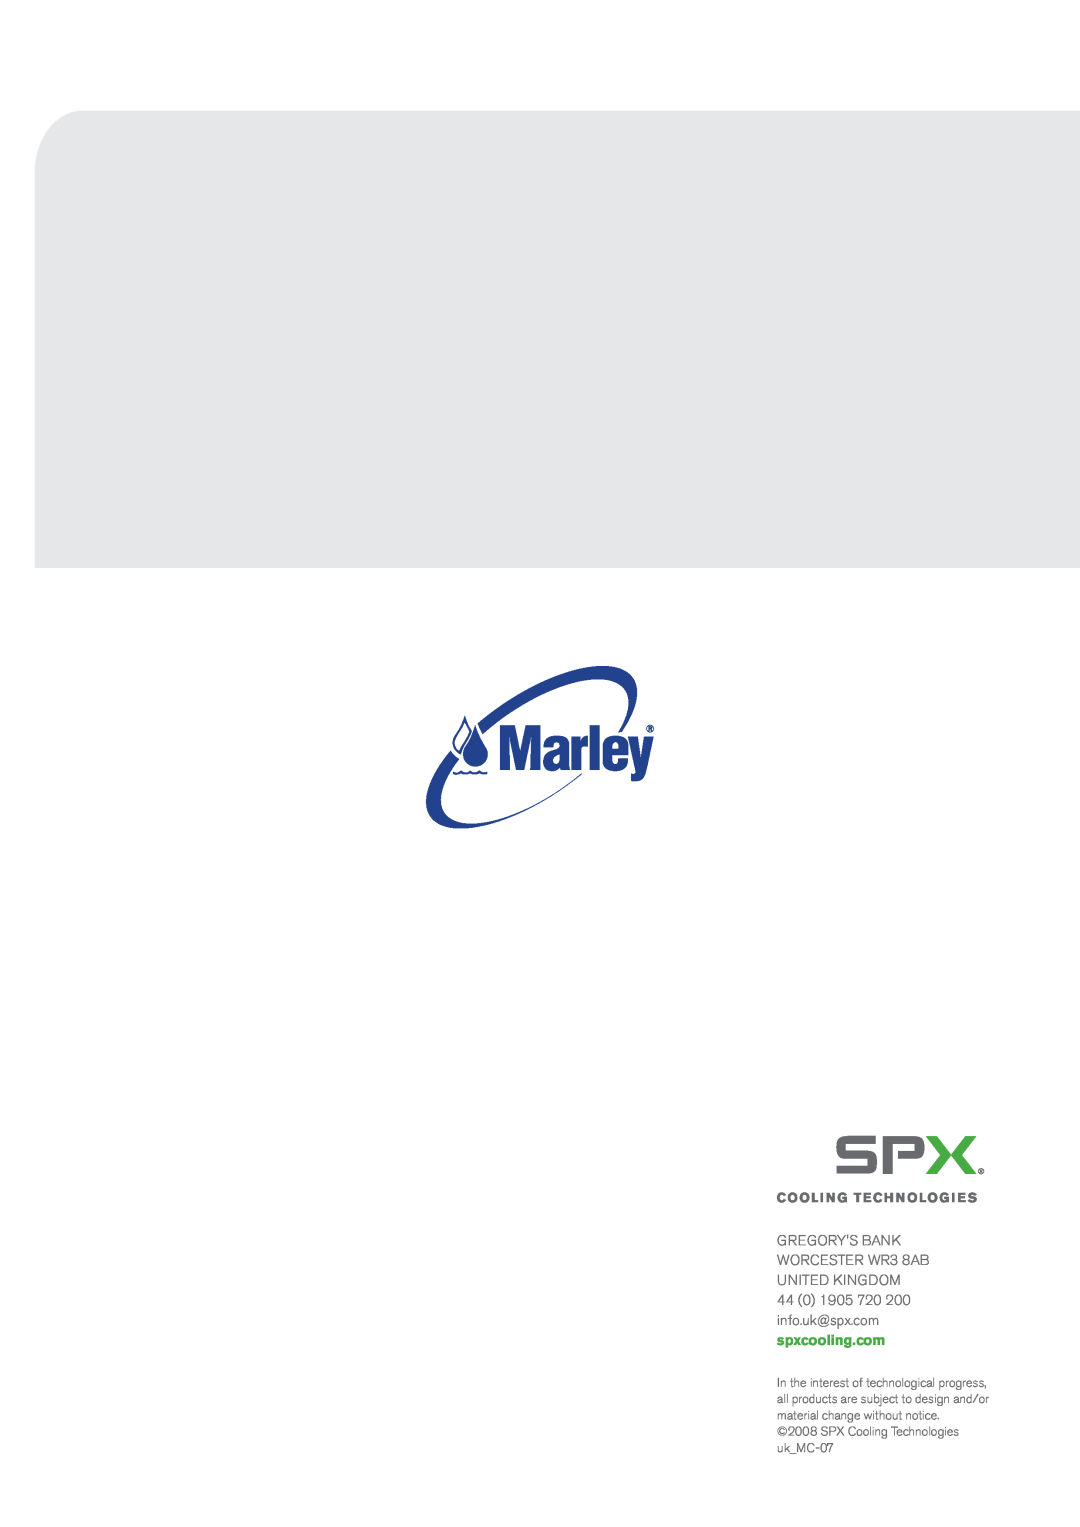 SPX Cooling Technologies Marley MCW GREGORYS BANK WORCESTER WR3 8AB UNITED KINGDOM, SPX Cooling Technologies uk MC-07 